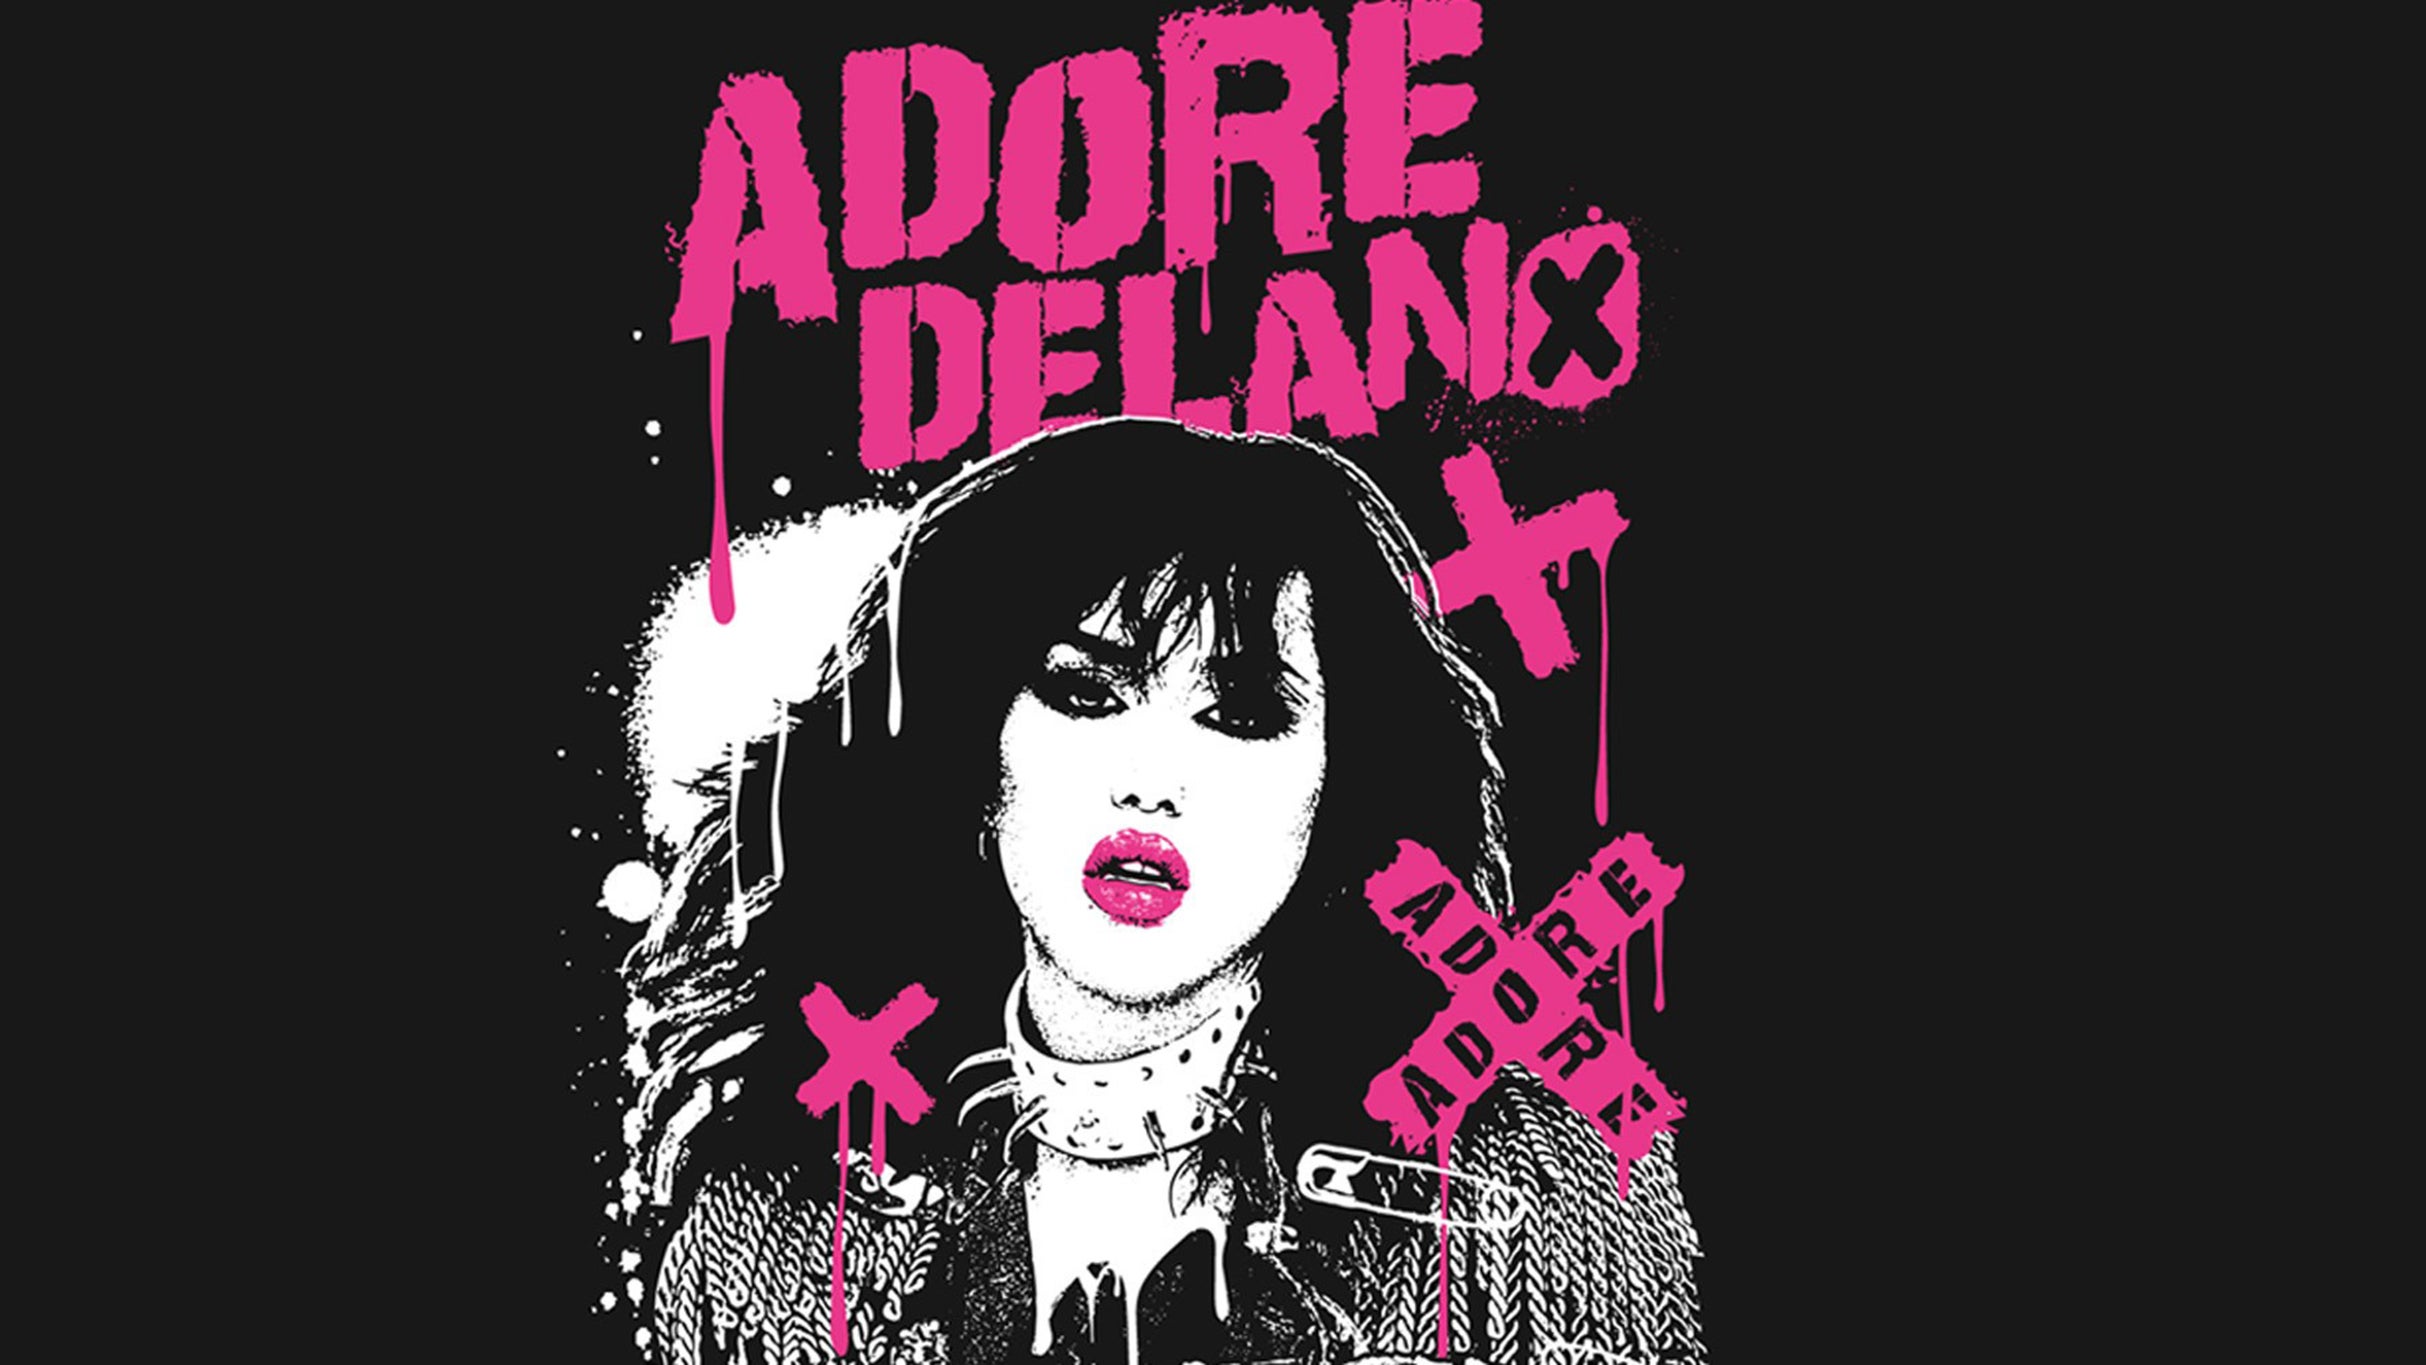 Adore Delano free pre-sale code for show tickets in Pittsburgh, PA (Spirit Hall)